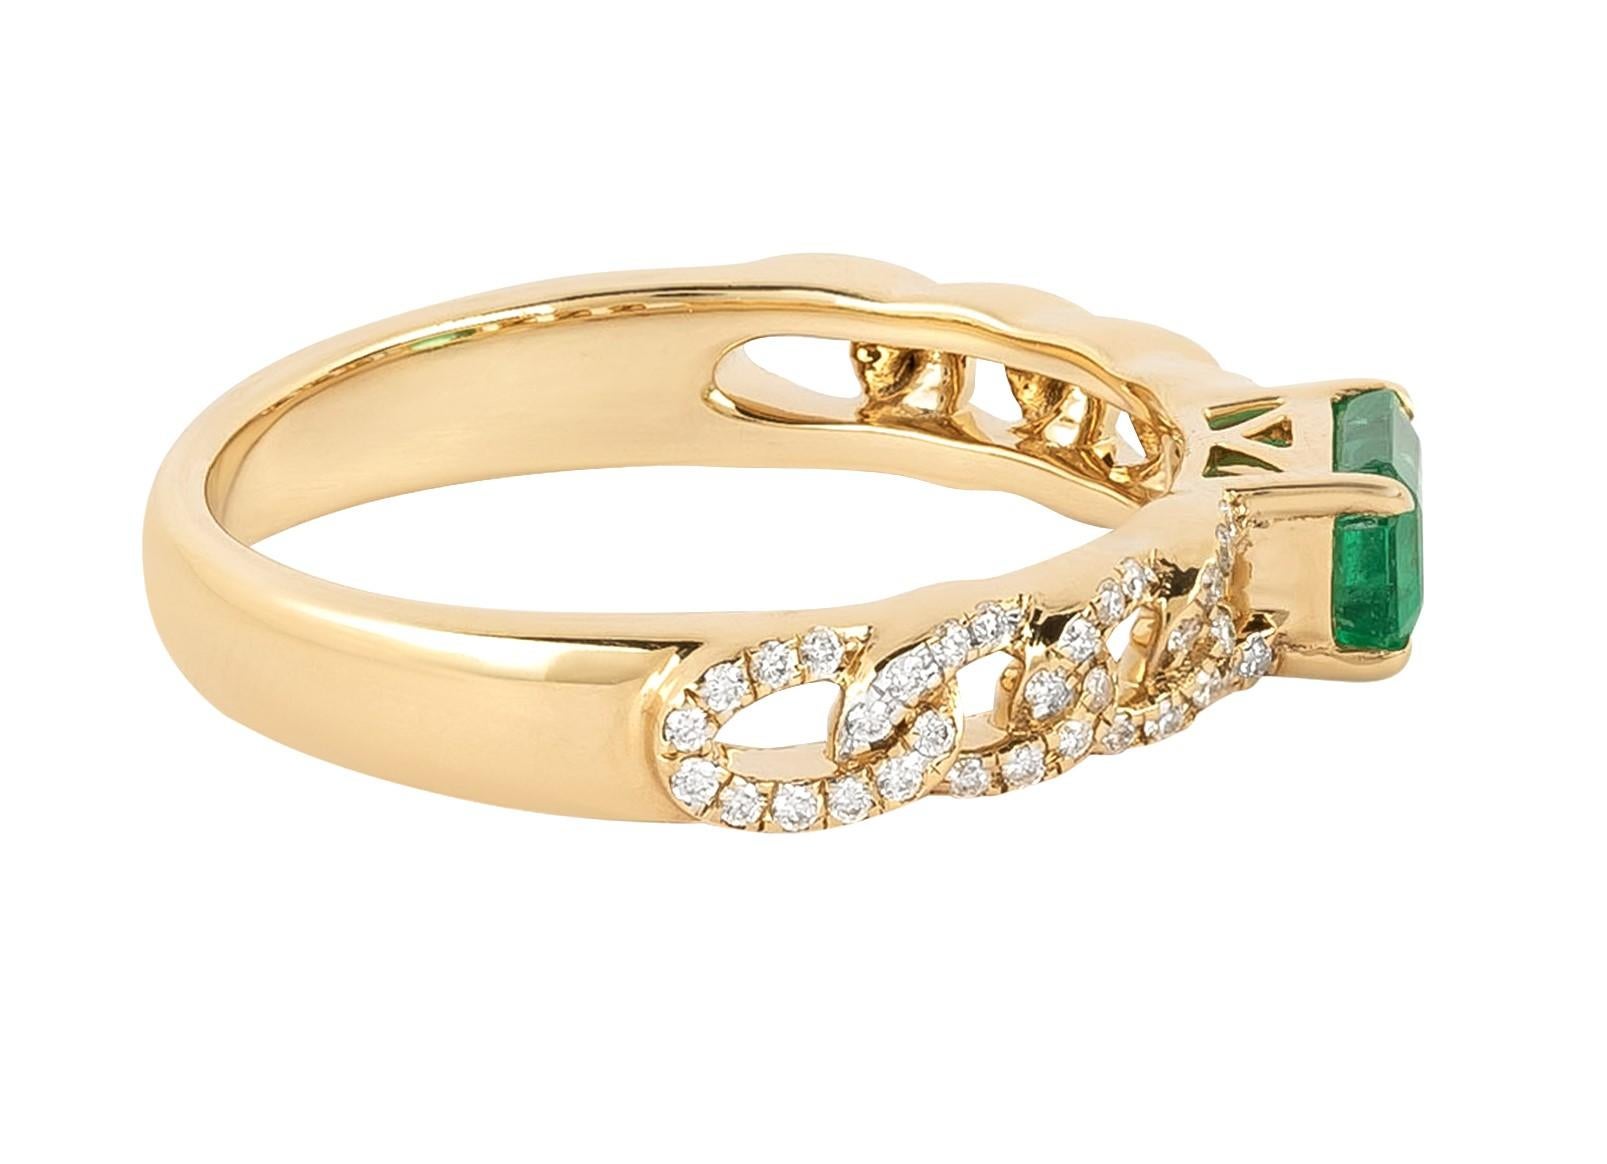 Women's 18 Karat Gold 0.78 Carat Diamond and Emerald Cocktail Ring  For Sale